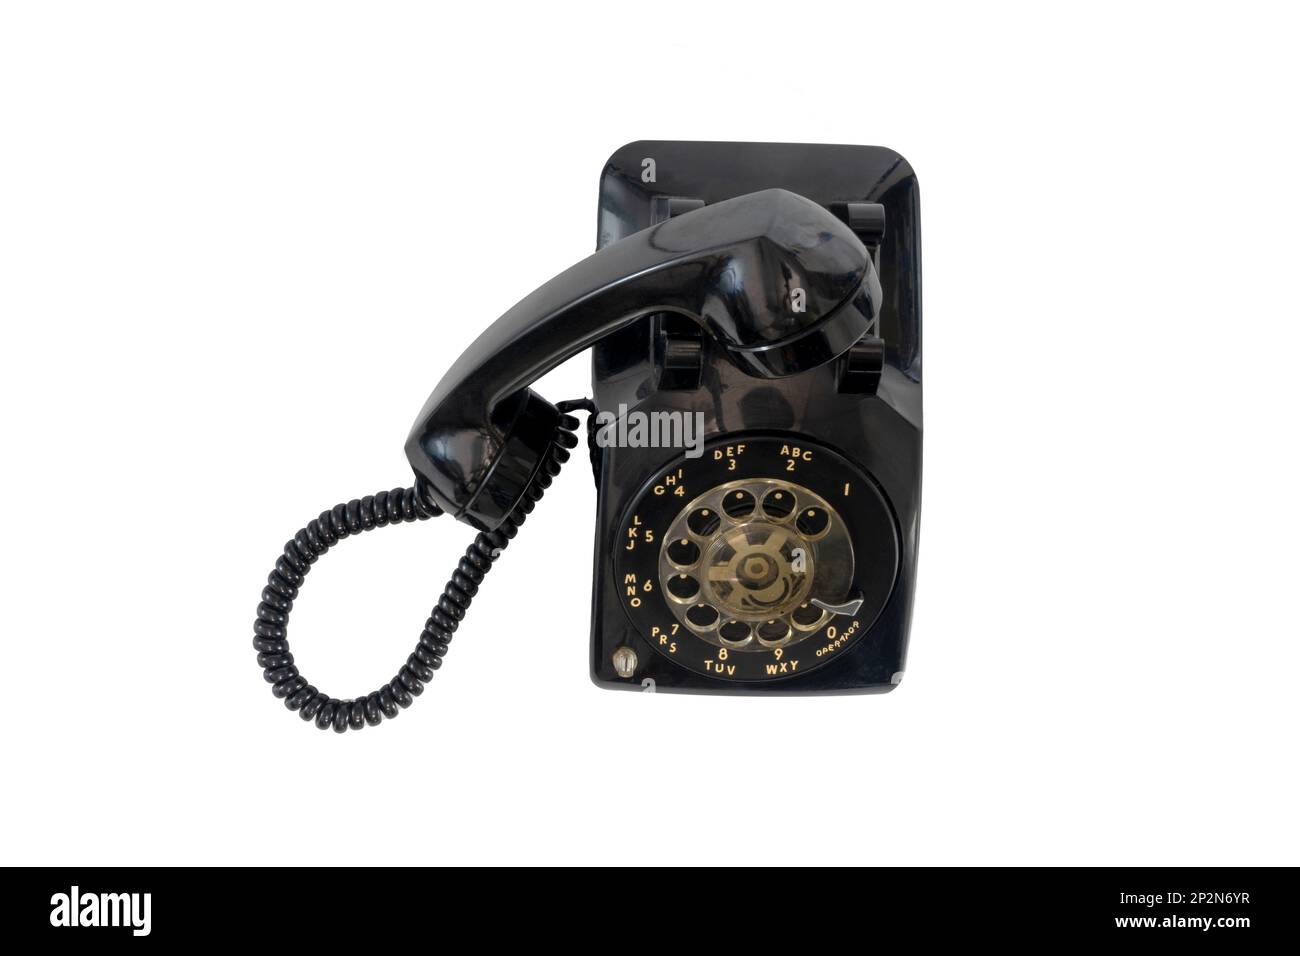 Old vintage black used telephone for use in home an isolated on white background Stock Photo